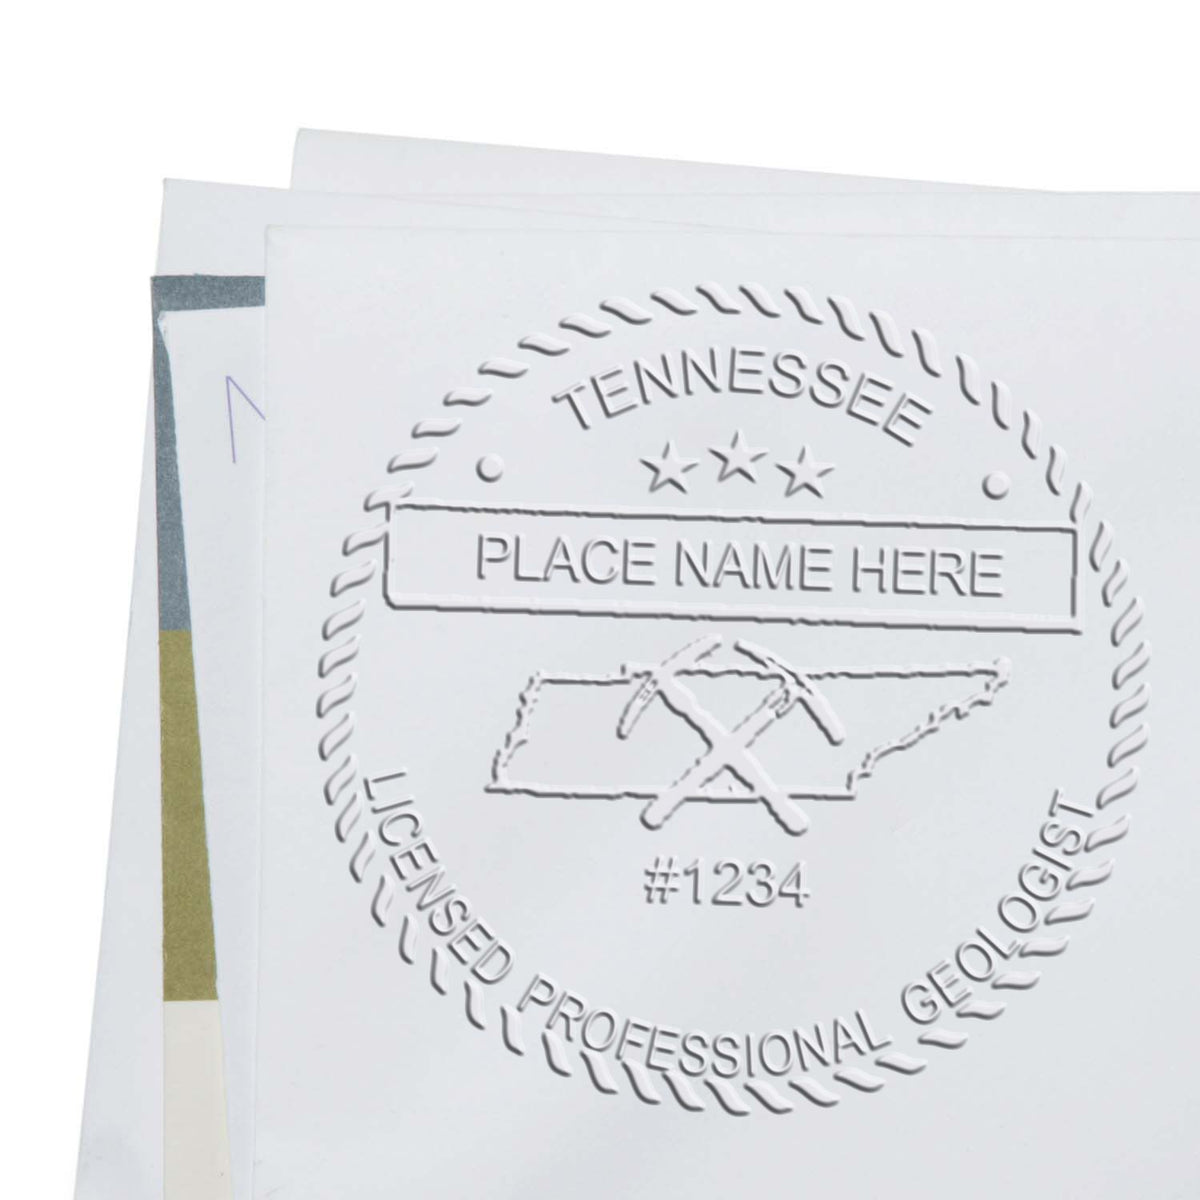 An alternative view of the Handheld Tennessee Professional Geologist Embosser stamped on a sheet of paper showing the image in use